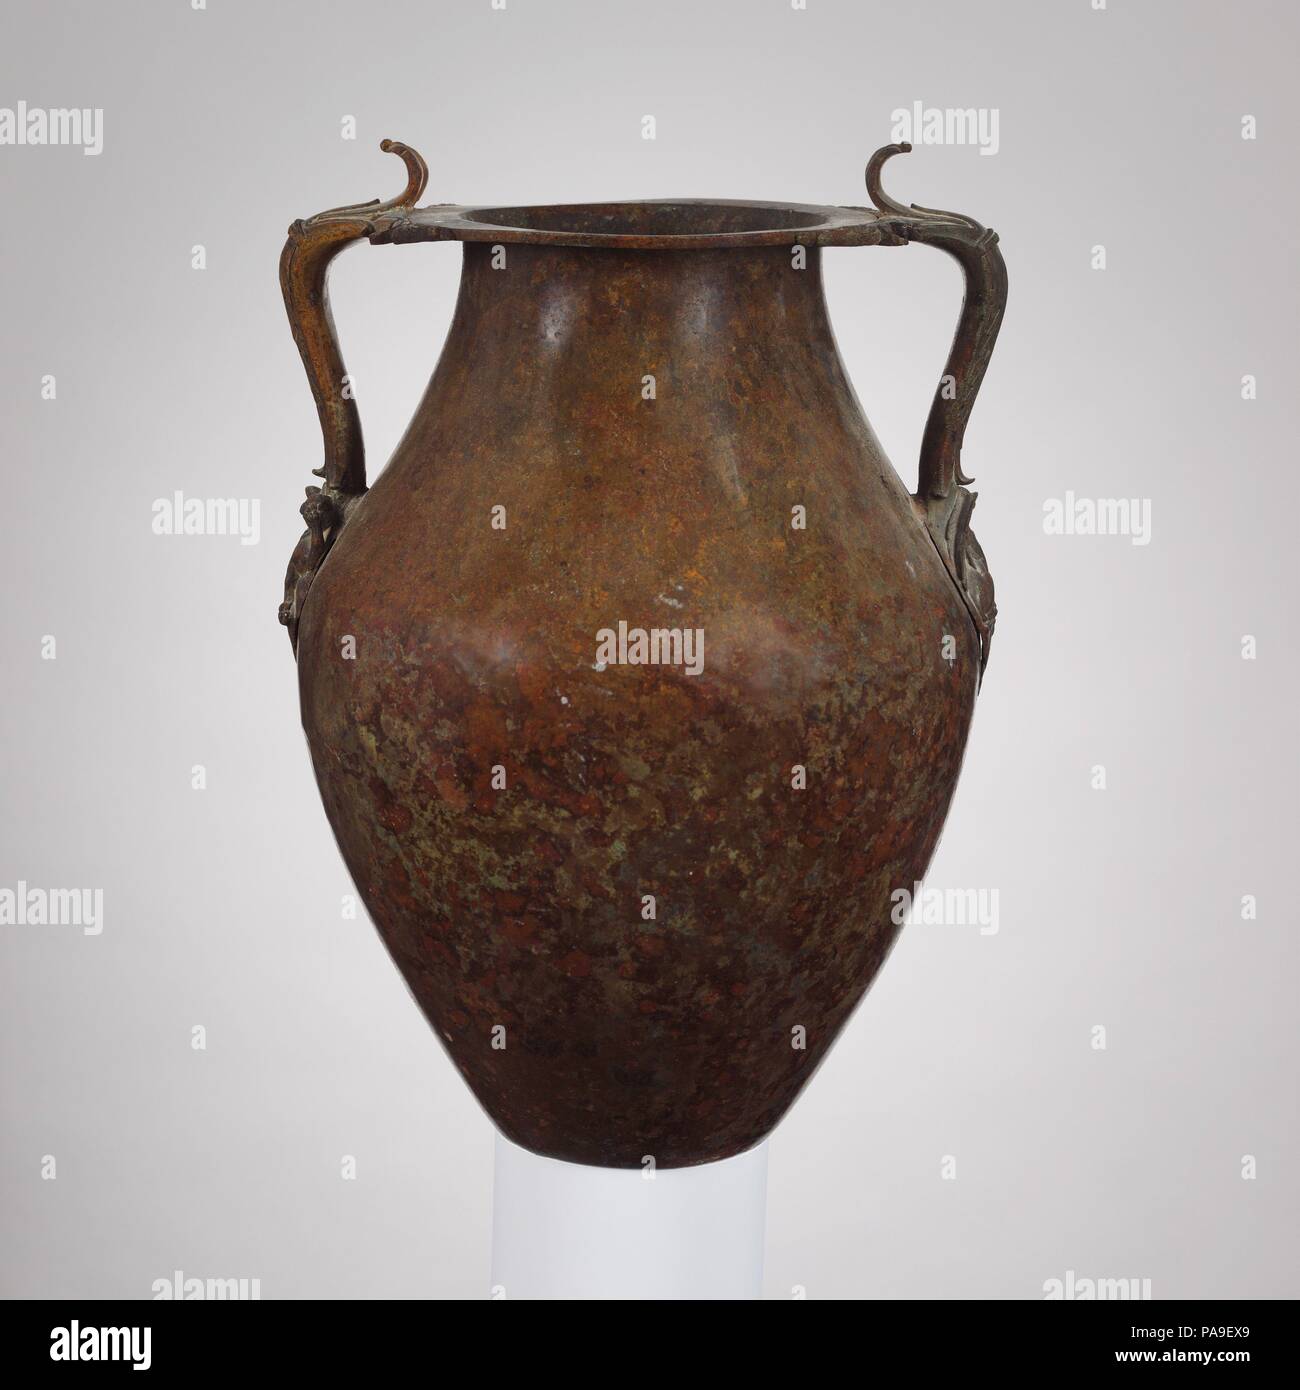 Bronze jar with two handles. Culture: Roman. Dimensions: H. 16 1/16 in. (40.3 cm). Date: 1st century A.D..  The handles have been restored, possibly in antiquity. Museum: Metropolitan Museum of Art, New York, USA. Stock Photo